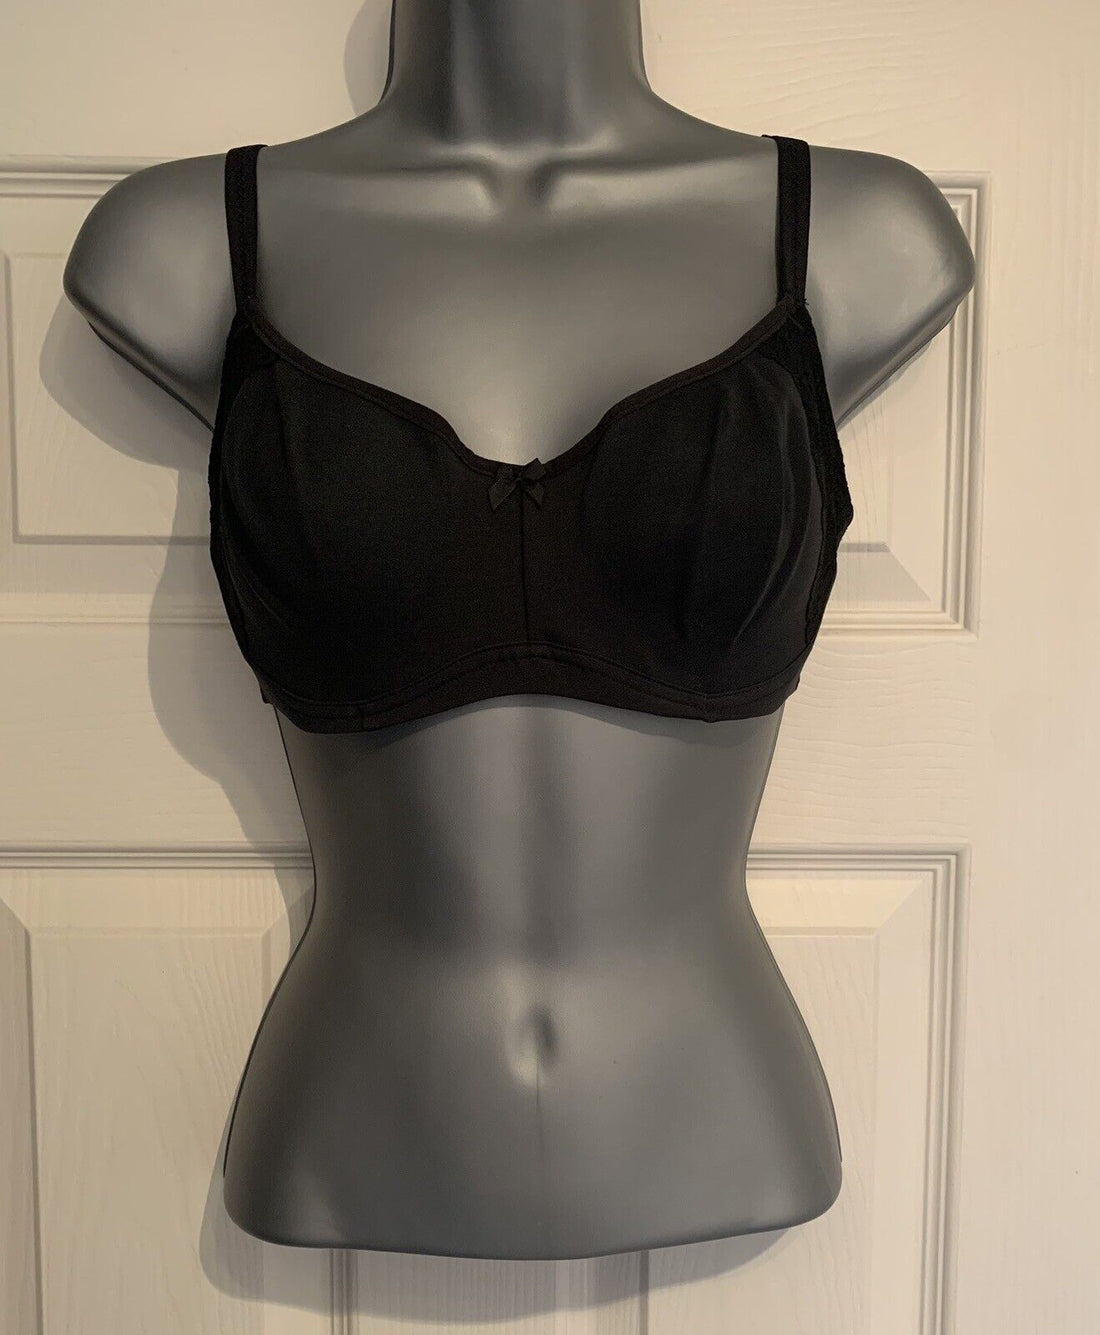 NEW EX M&S BLACK All-over Lace Non-Padded Full Cup Bra - Size 34 B